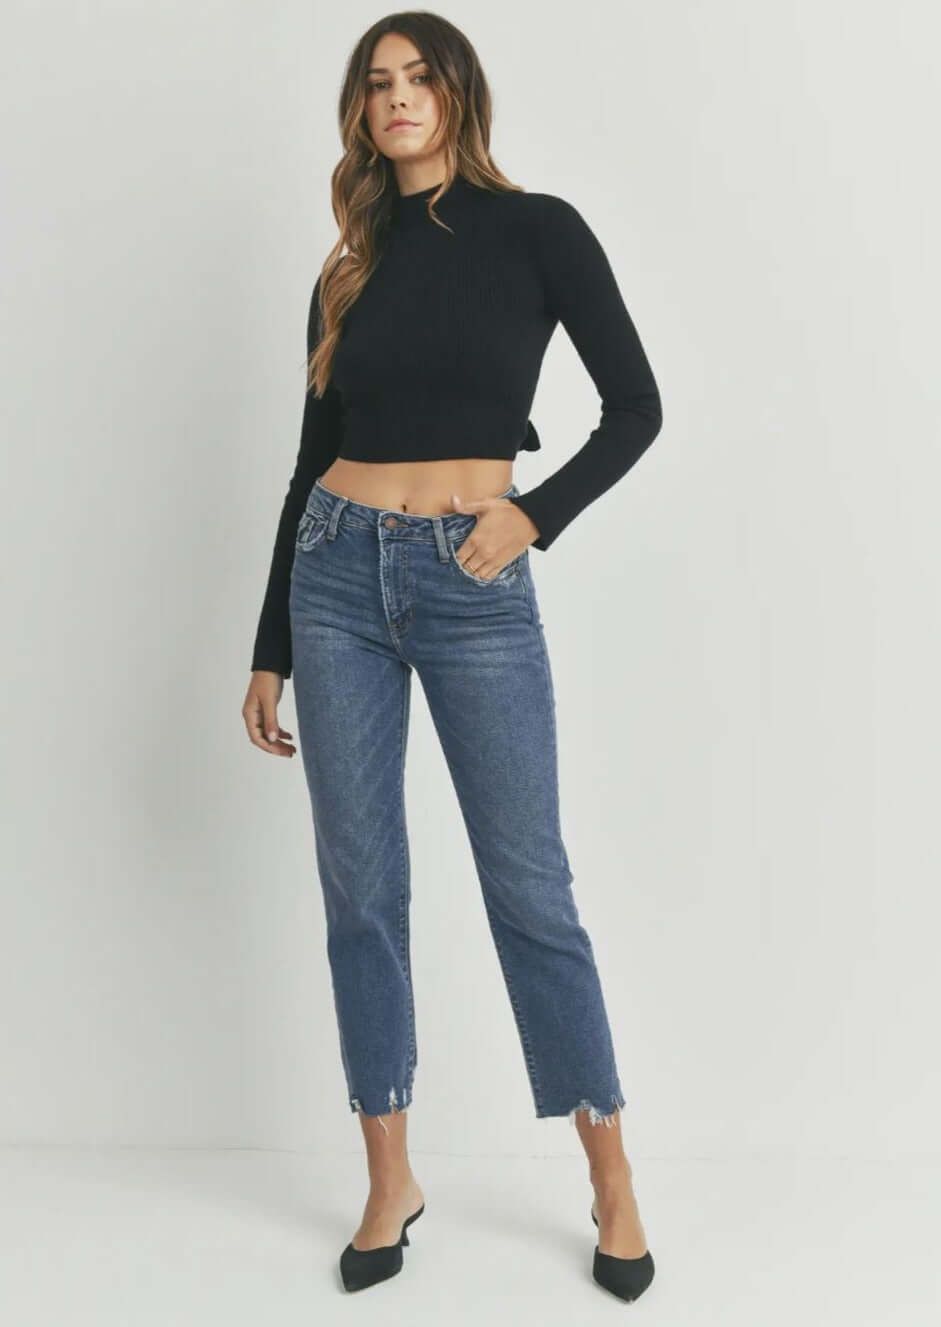 Just Black Denim Relaxed Fit Mid Rise Distressed Hem Cropped Jeans BP304J | Made in USA | Classy Cozy Cool Made in America Women's Clothing Boutique